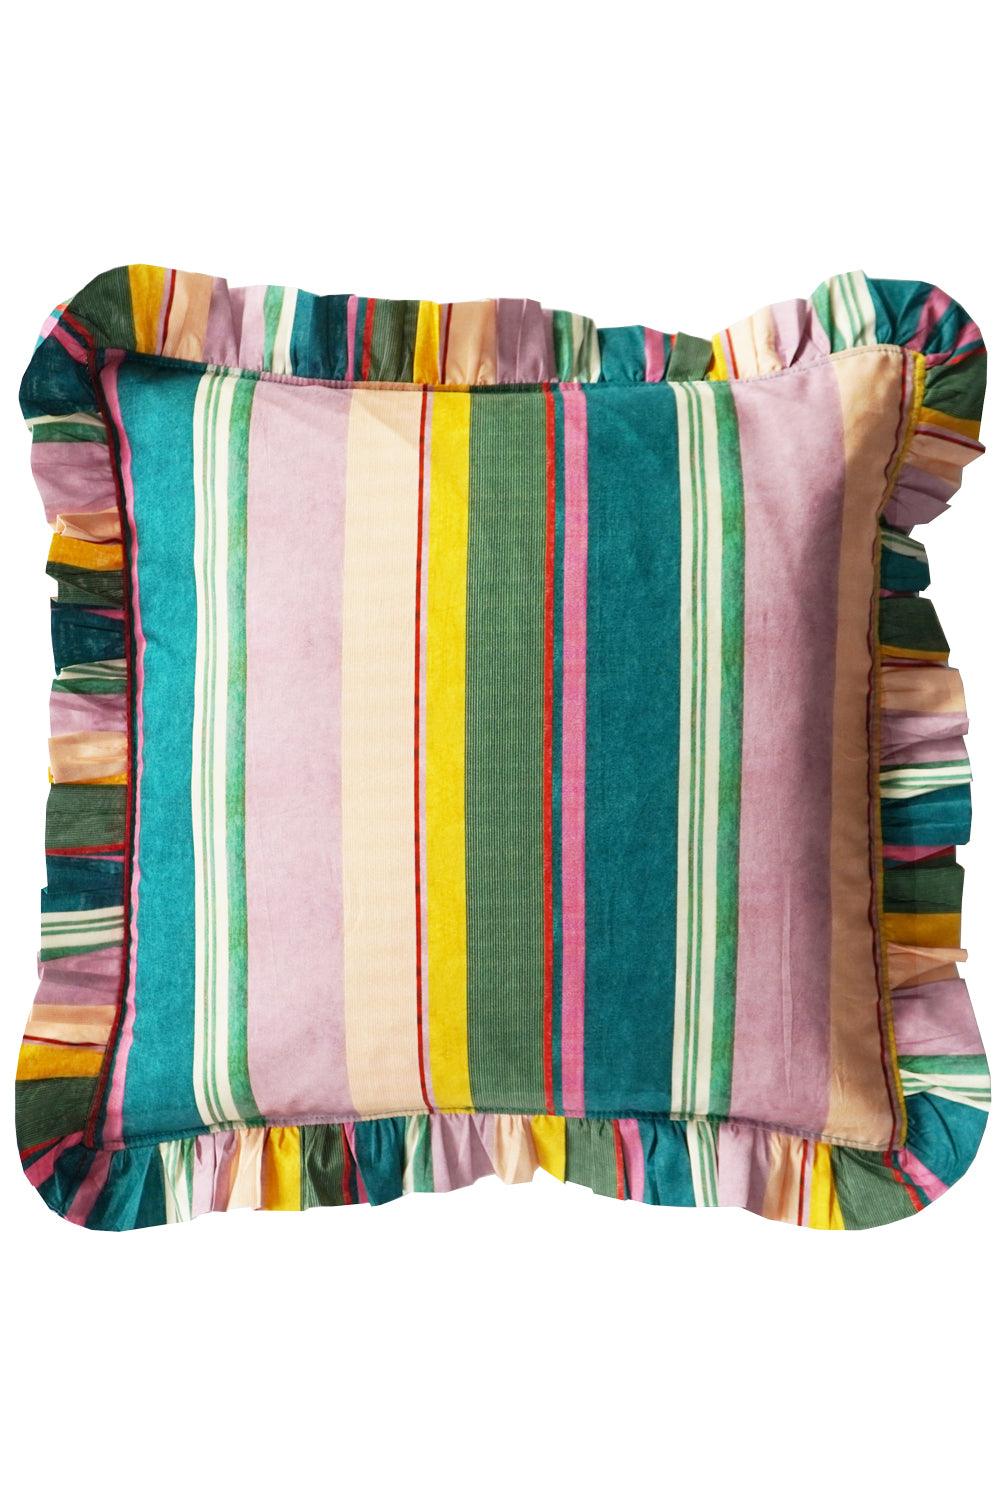 Ruffle Cushion made with Striped Liberty Fabric ARCHIVE SWATCH - Coco & Wolf